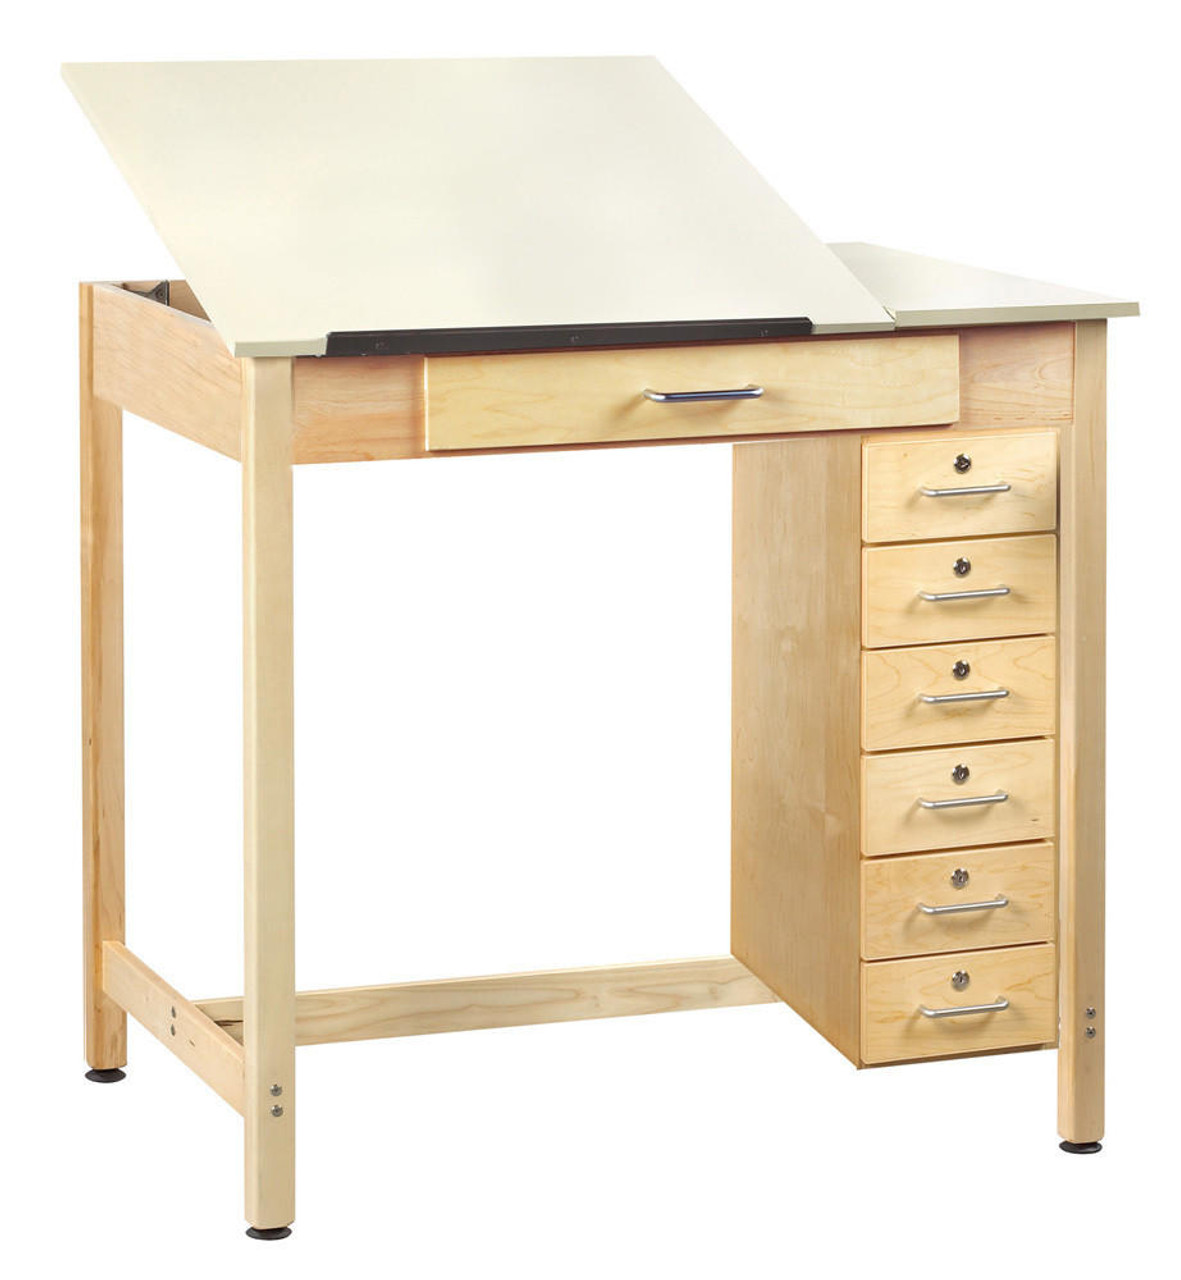 Wooden Drafting Table Drawing Board Computer Desk And Storage